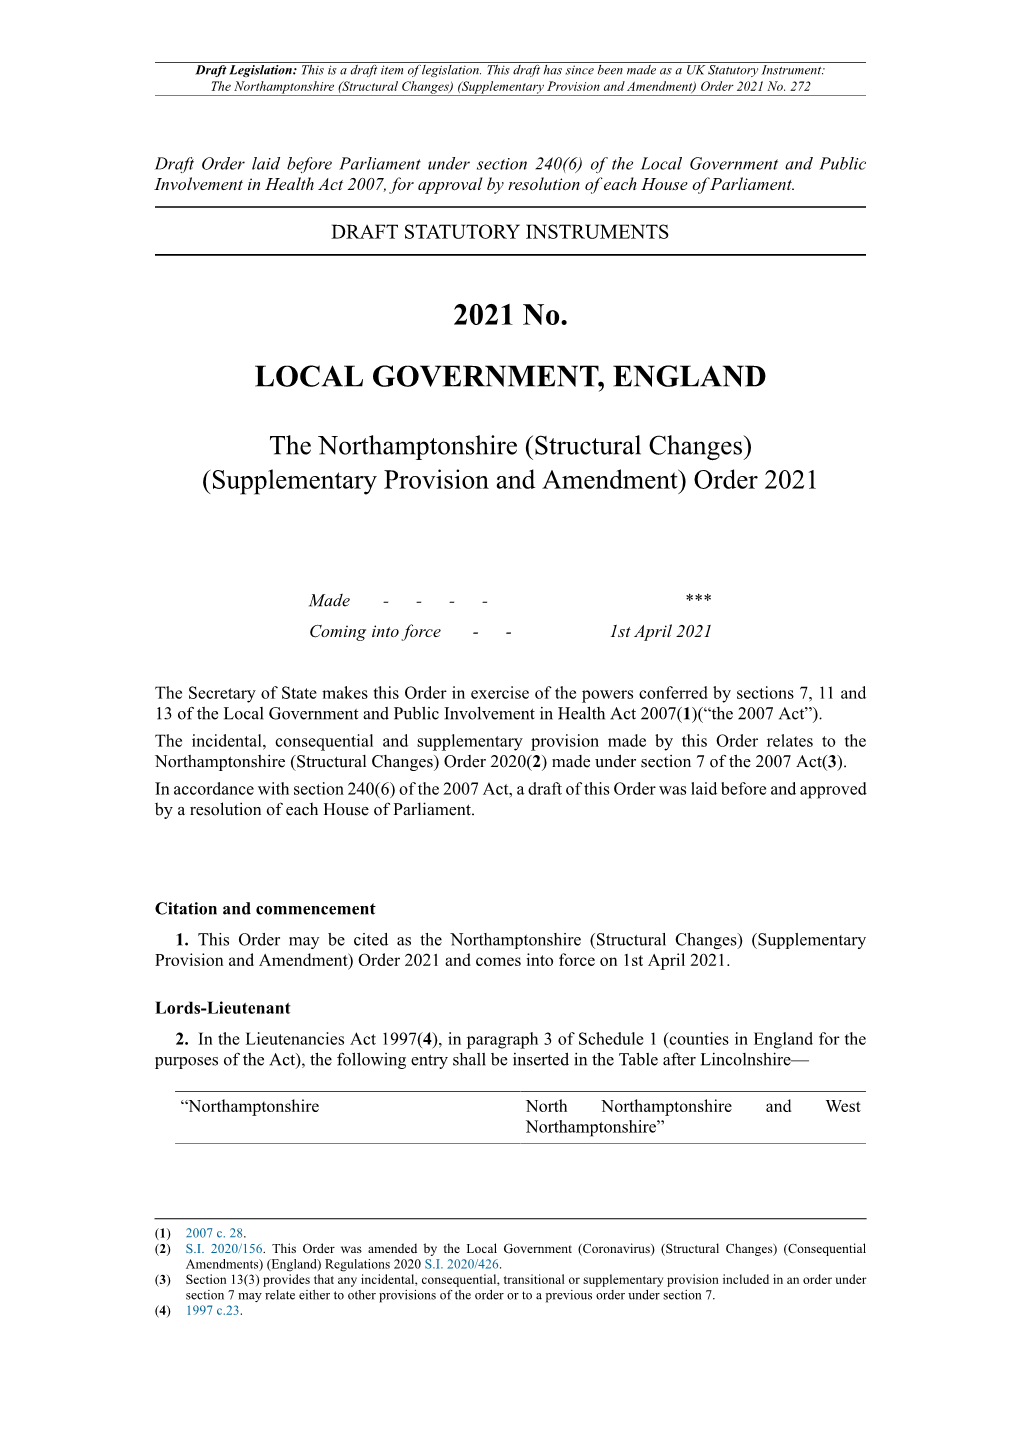 The Northamptonshire (Structural Changes) (Supplementary Provision and Amendment) Order 2021 No